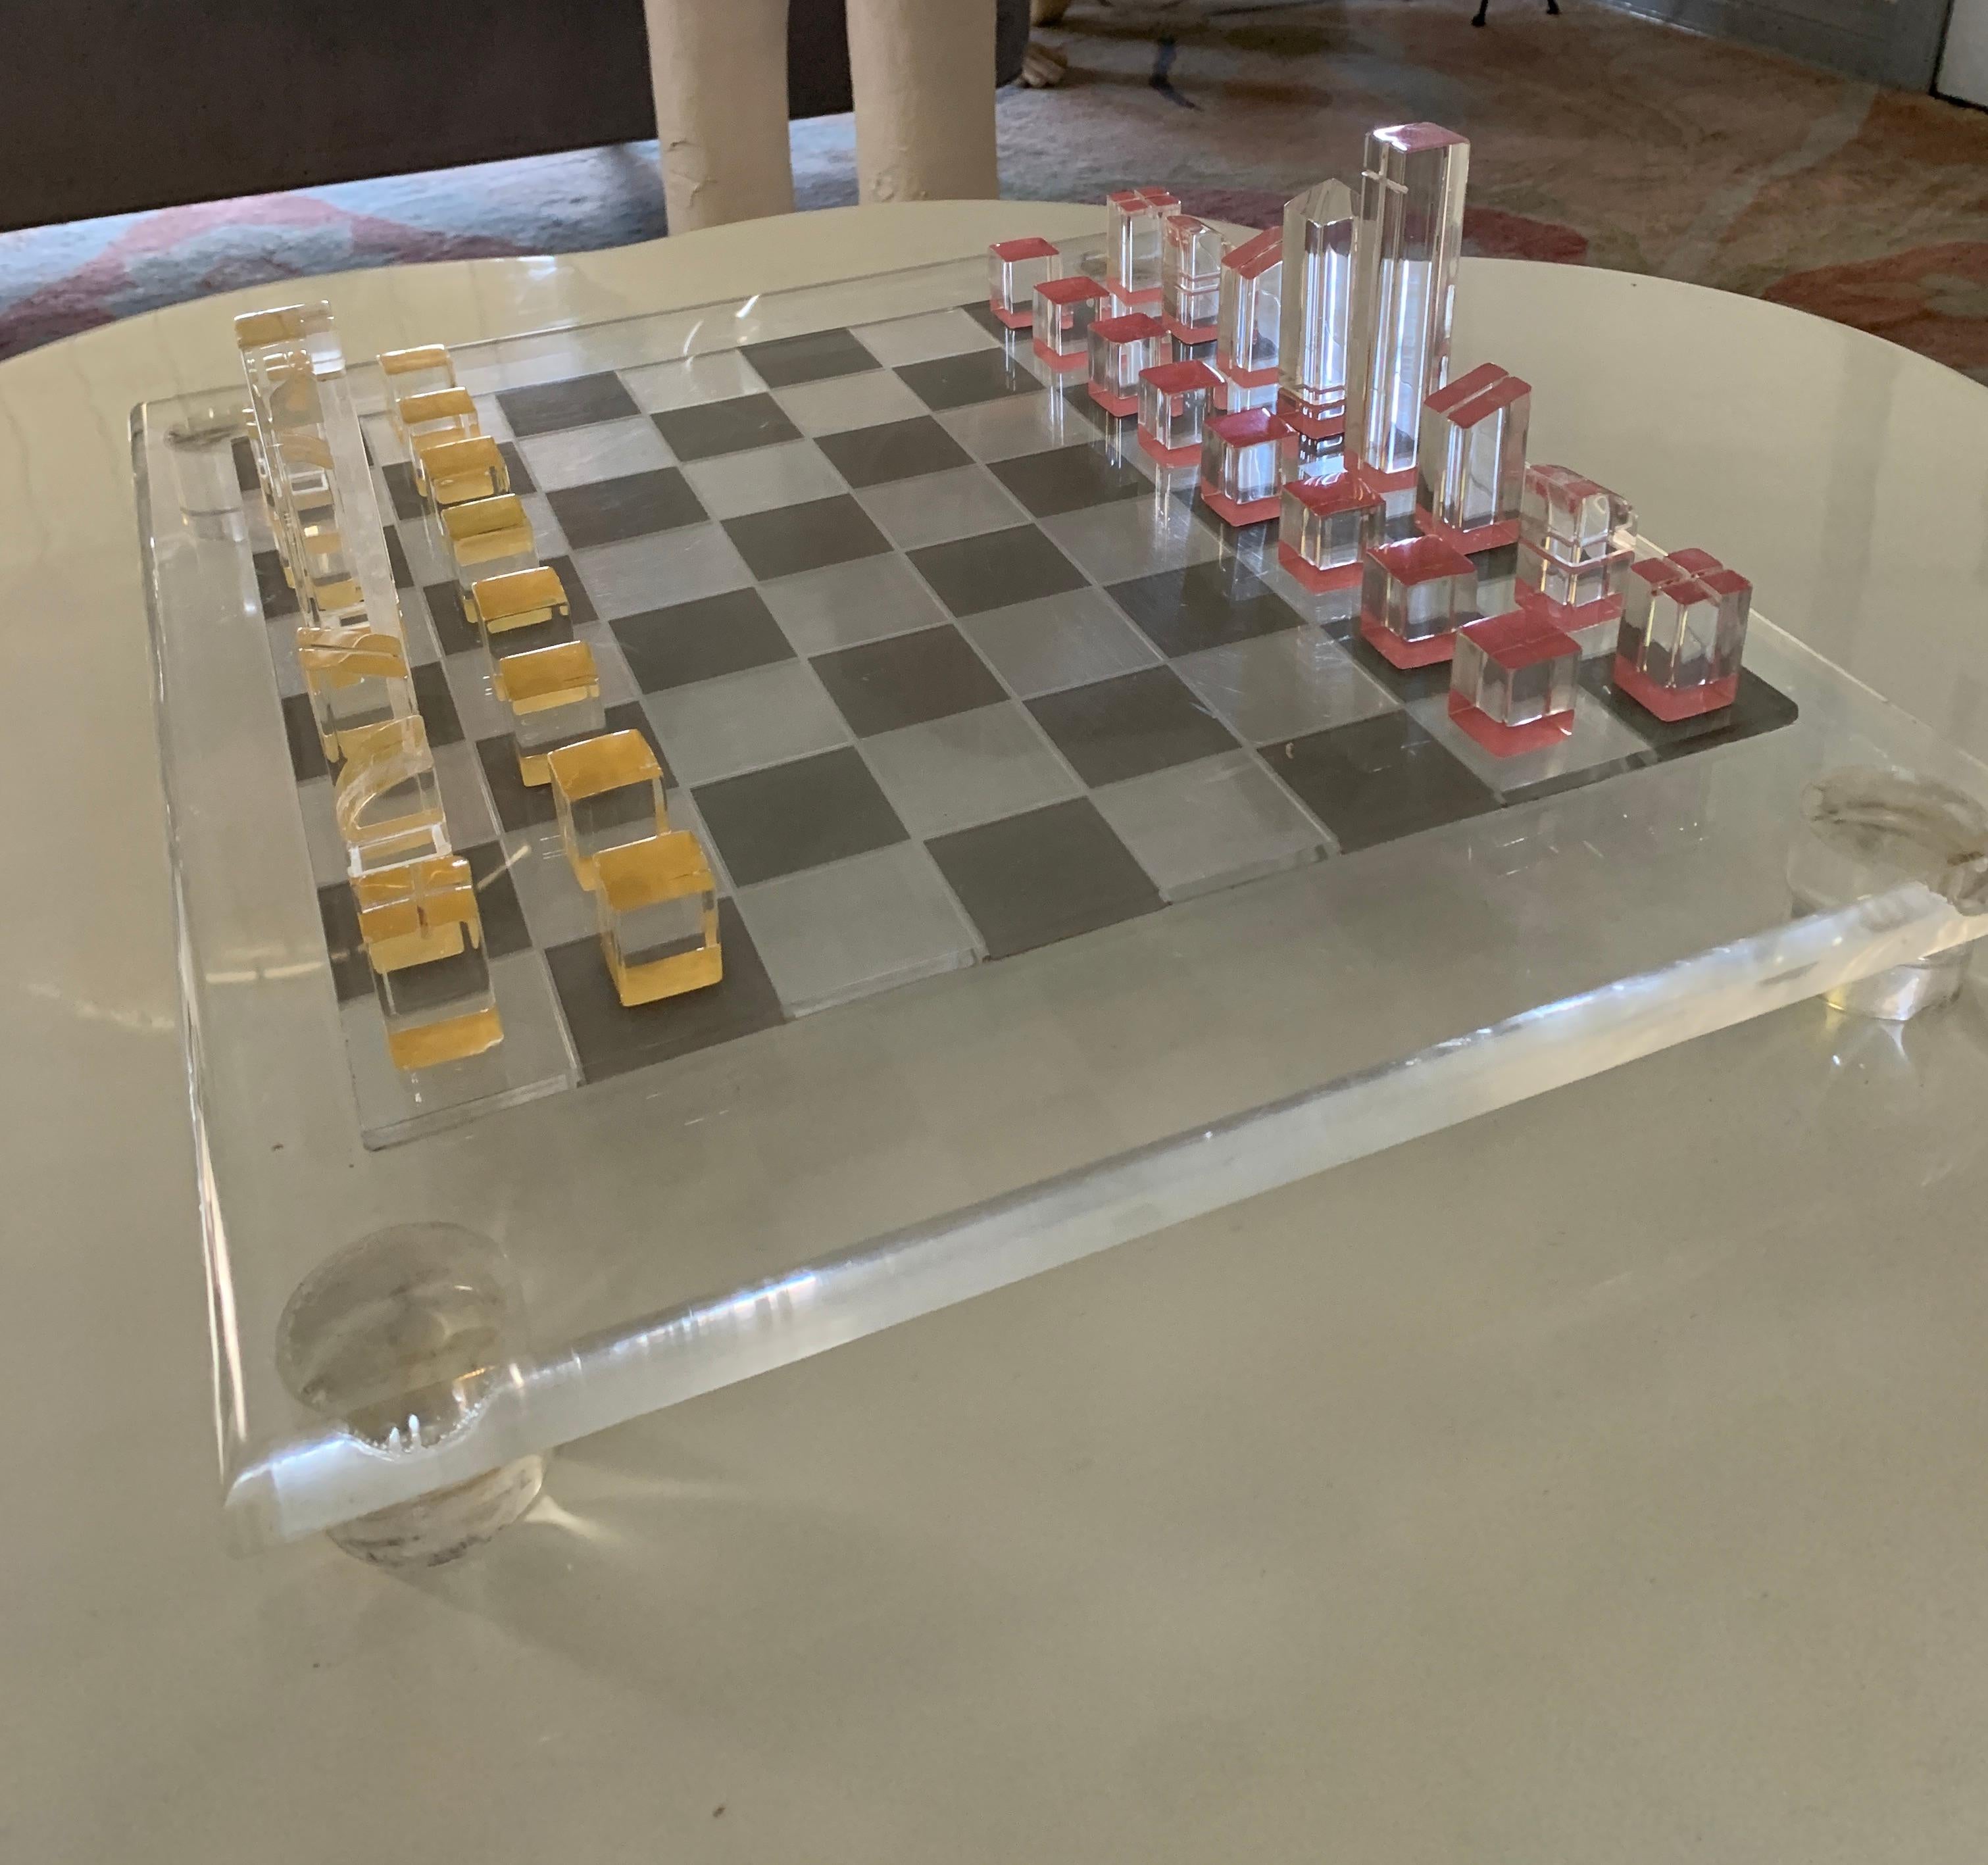 A large, and quite spectacular acrylic MidCentury chess set. The board is very thick and substantial on four thick disk  legs, the pieces are defined by a painted yellow or orange color on the bottom. All pieces are uniquely scored or cut to